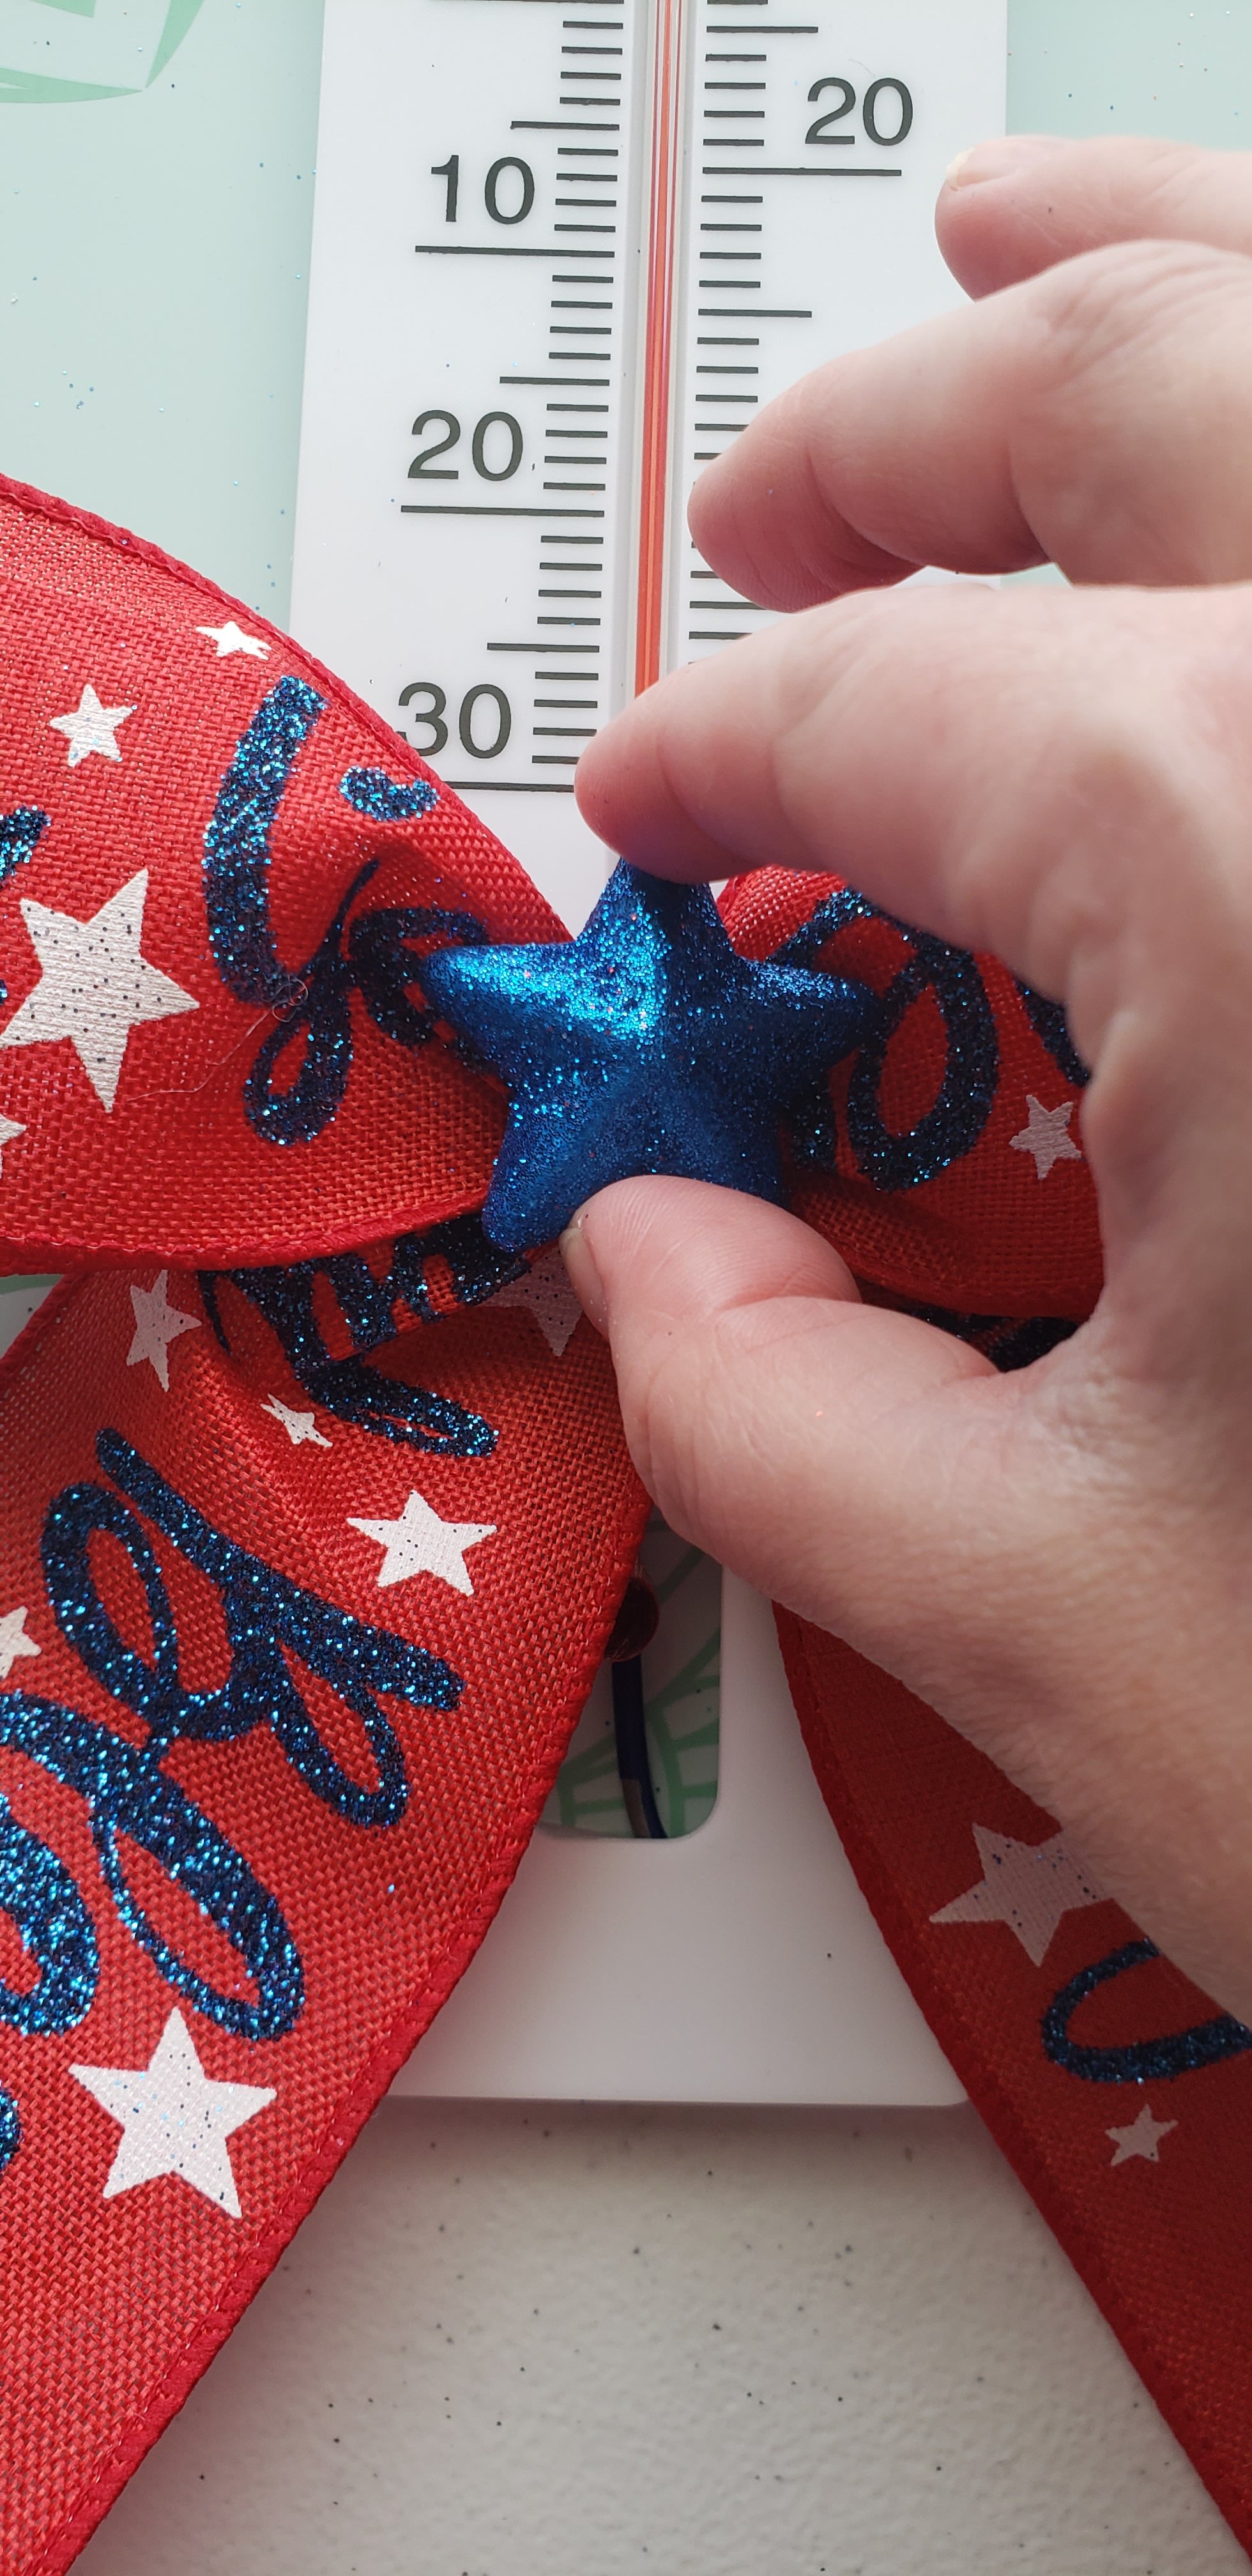 Gluing a blue scatter star to the center of the red, white, and blue bow.